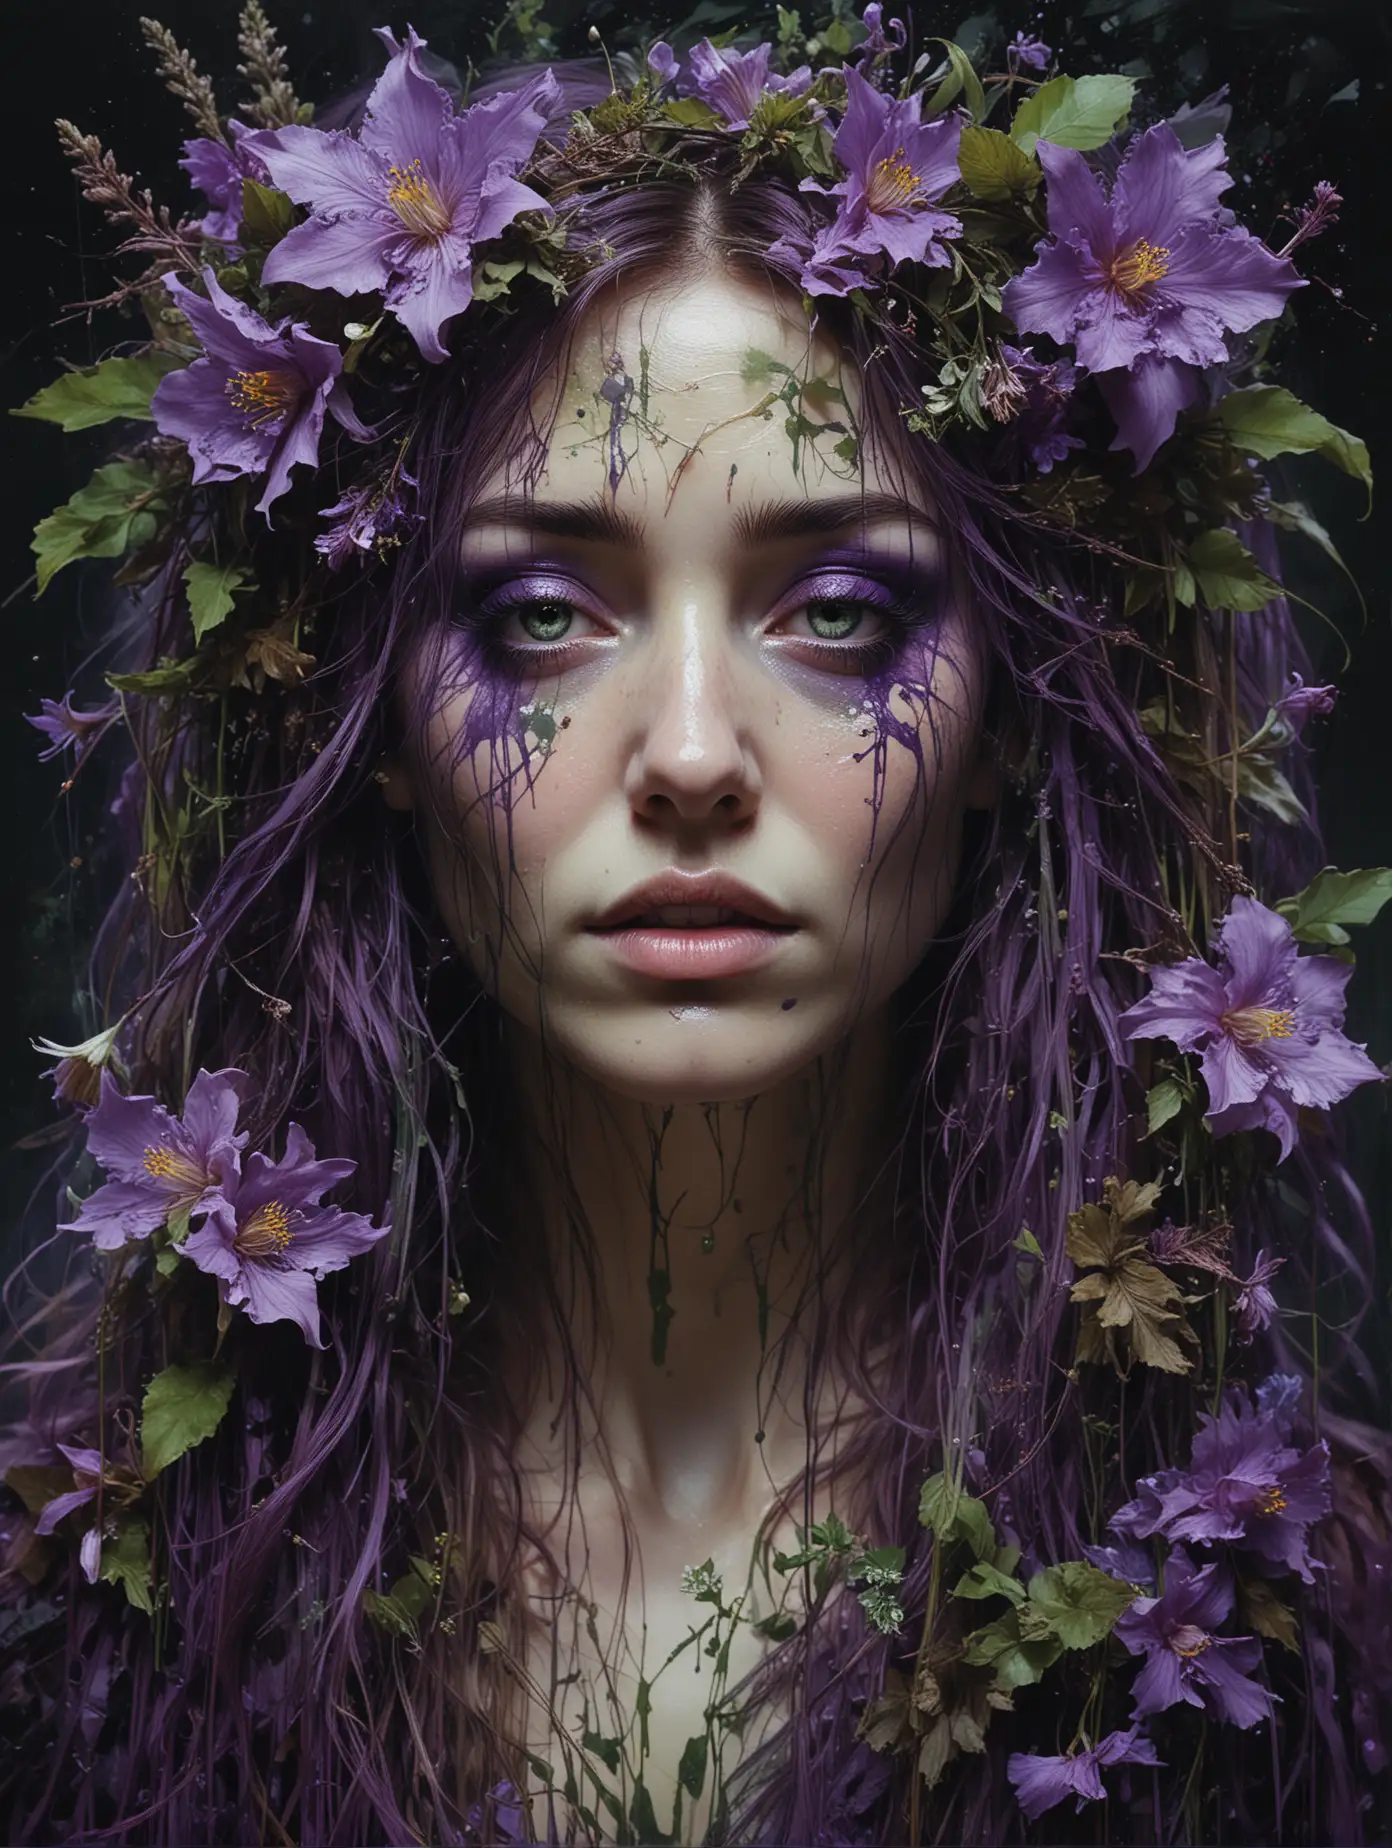  art by carne griffiths and wadim kashin, Ophelia, Blodeuwedd, flower face, Low saturation colour photography, purple and green palette, legendary welsh witch and mystic, in the dark mystical land of the mabinogion, masterful painting in the style of  Marco Mazzoni | Yuri Ivanovich, oil on canvas, highly detailed